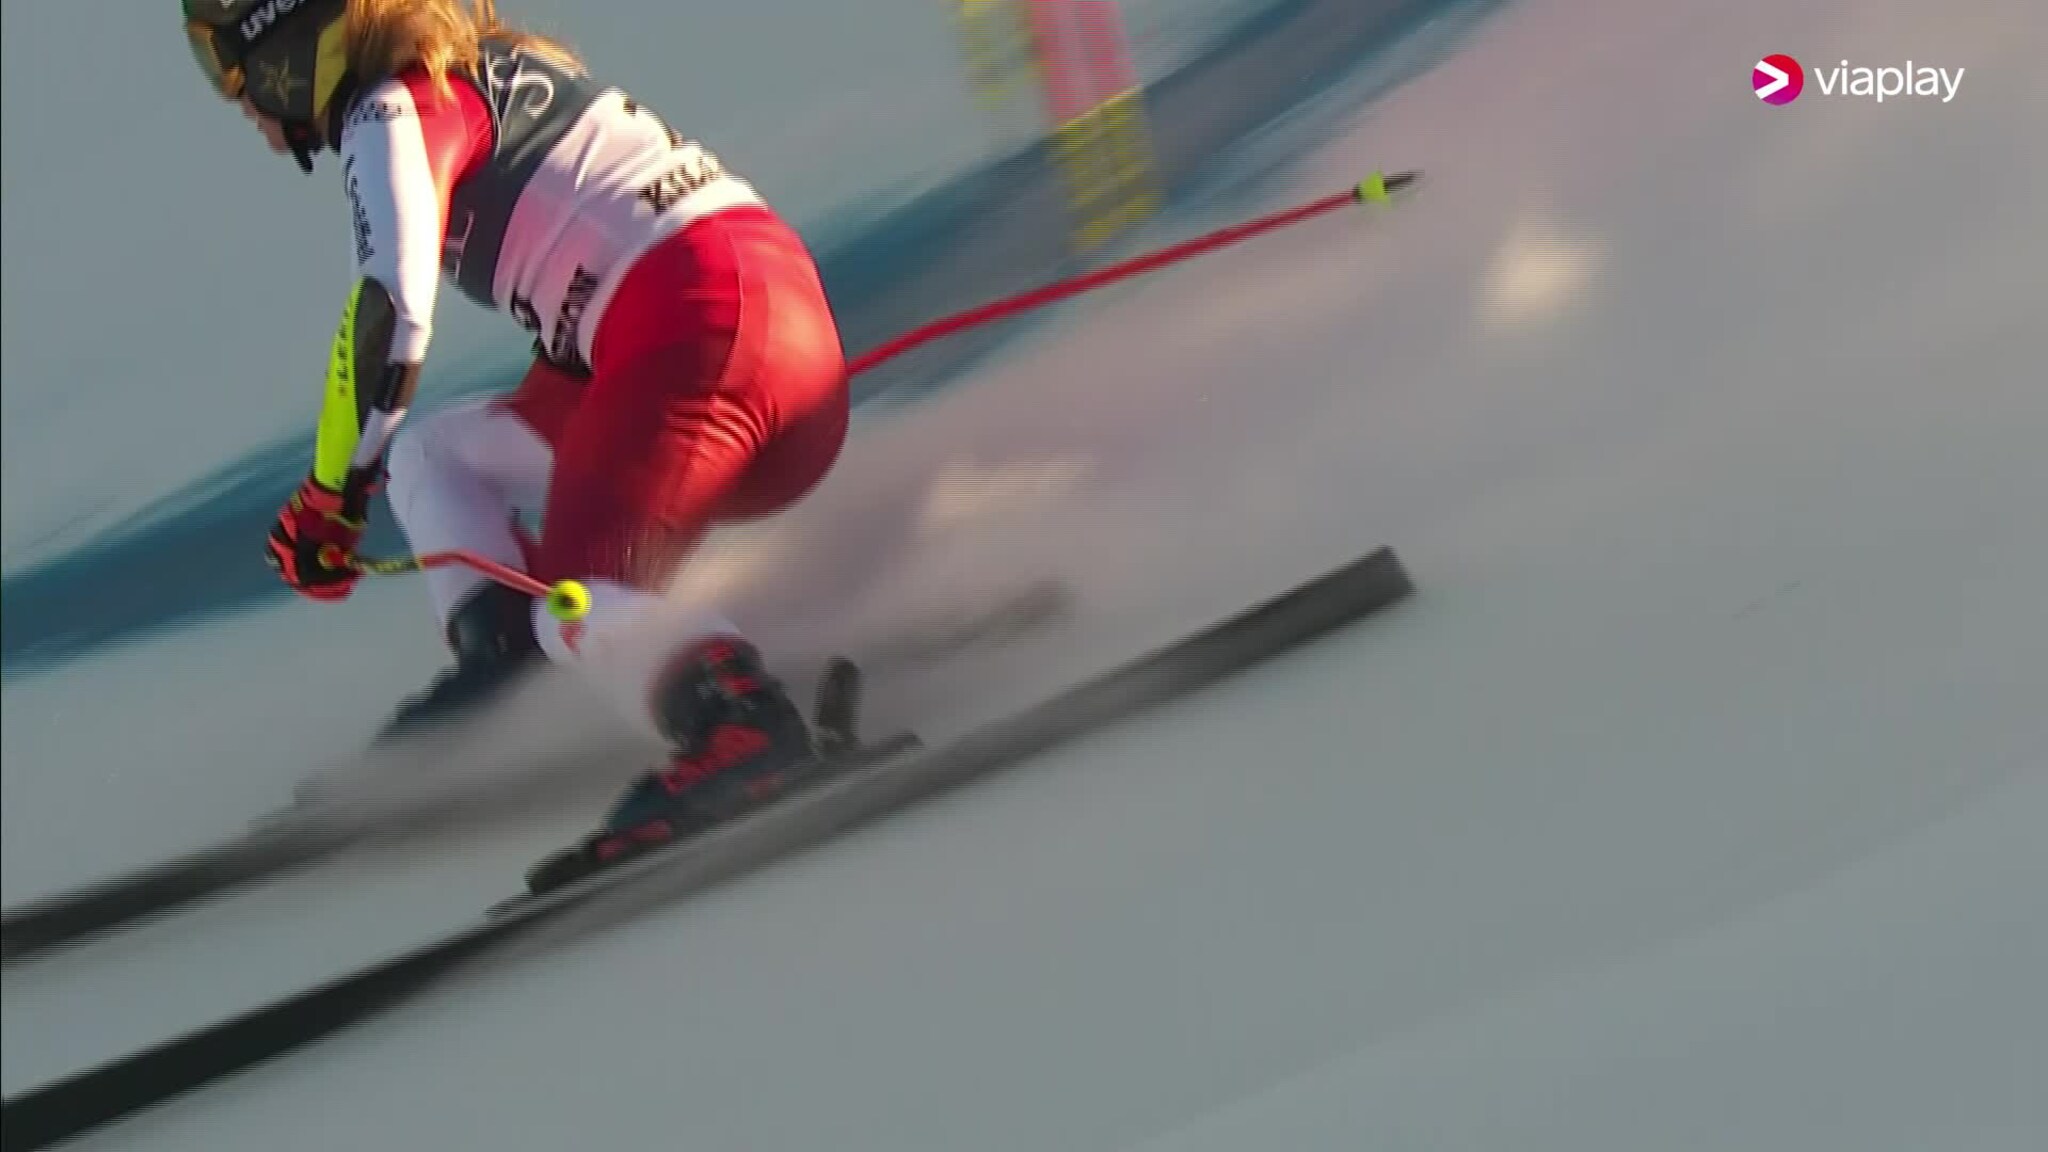 Alpine skiing: Confirmation of a serious knee injury for Maria Therese Tveberg